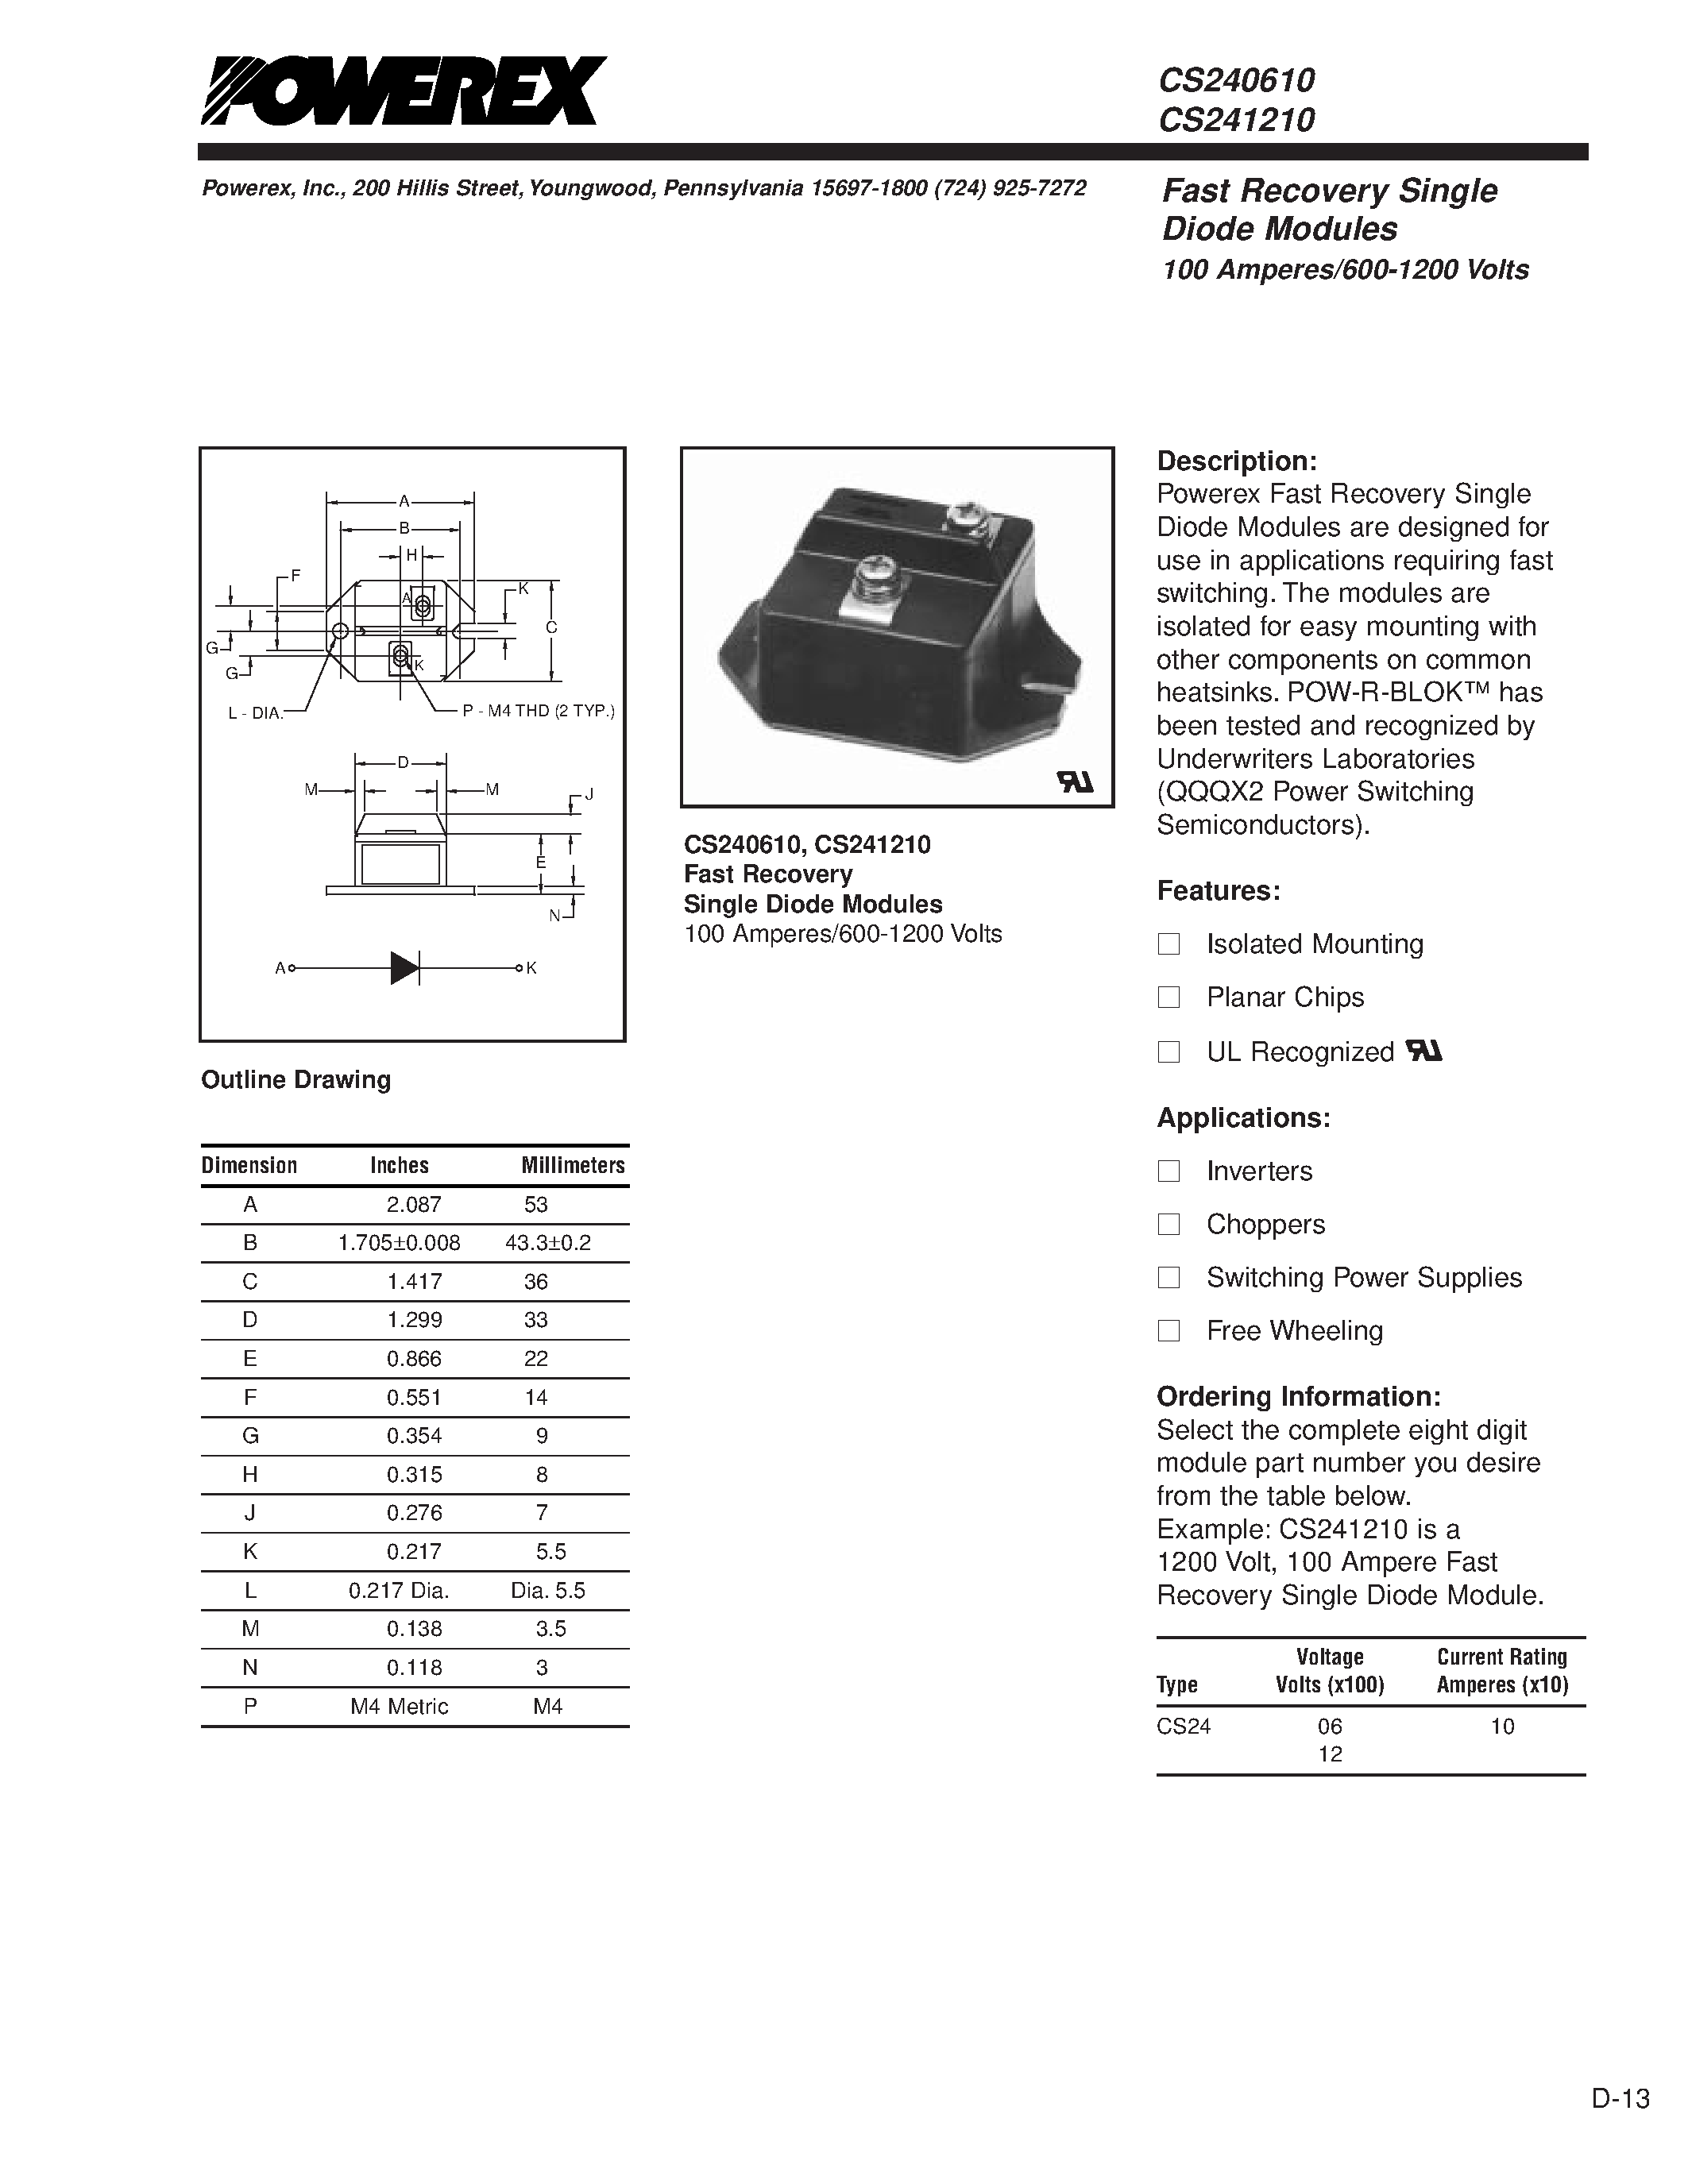 Datasheet CS240610 - Fast Recovery Single Diode Modules 100 Amperes/600-1200 Volts page 1